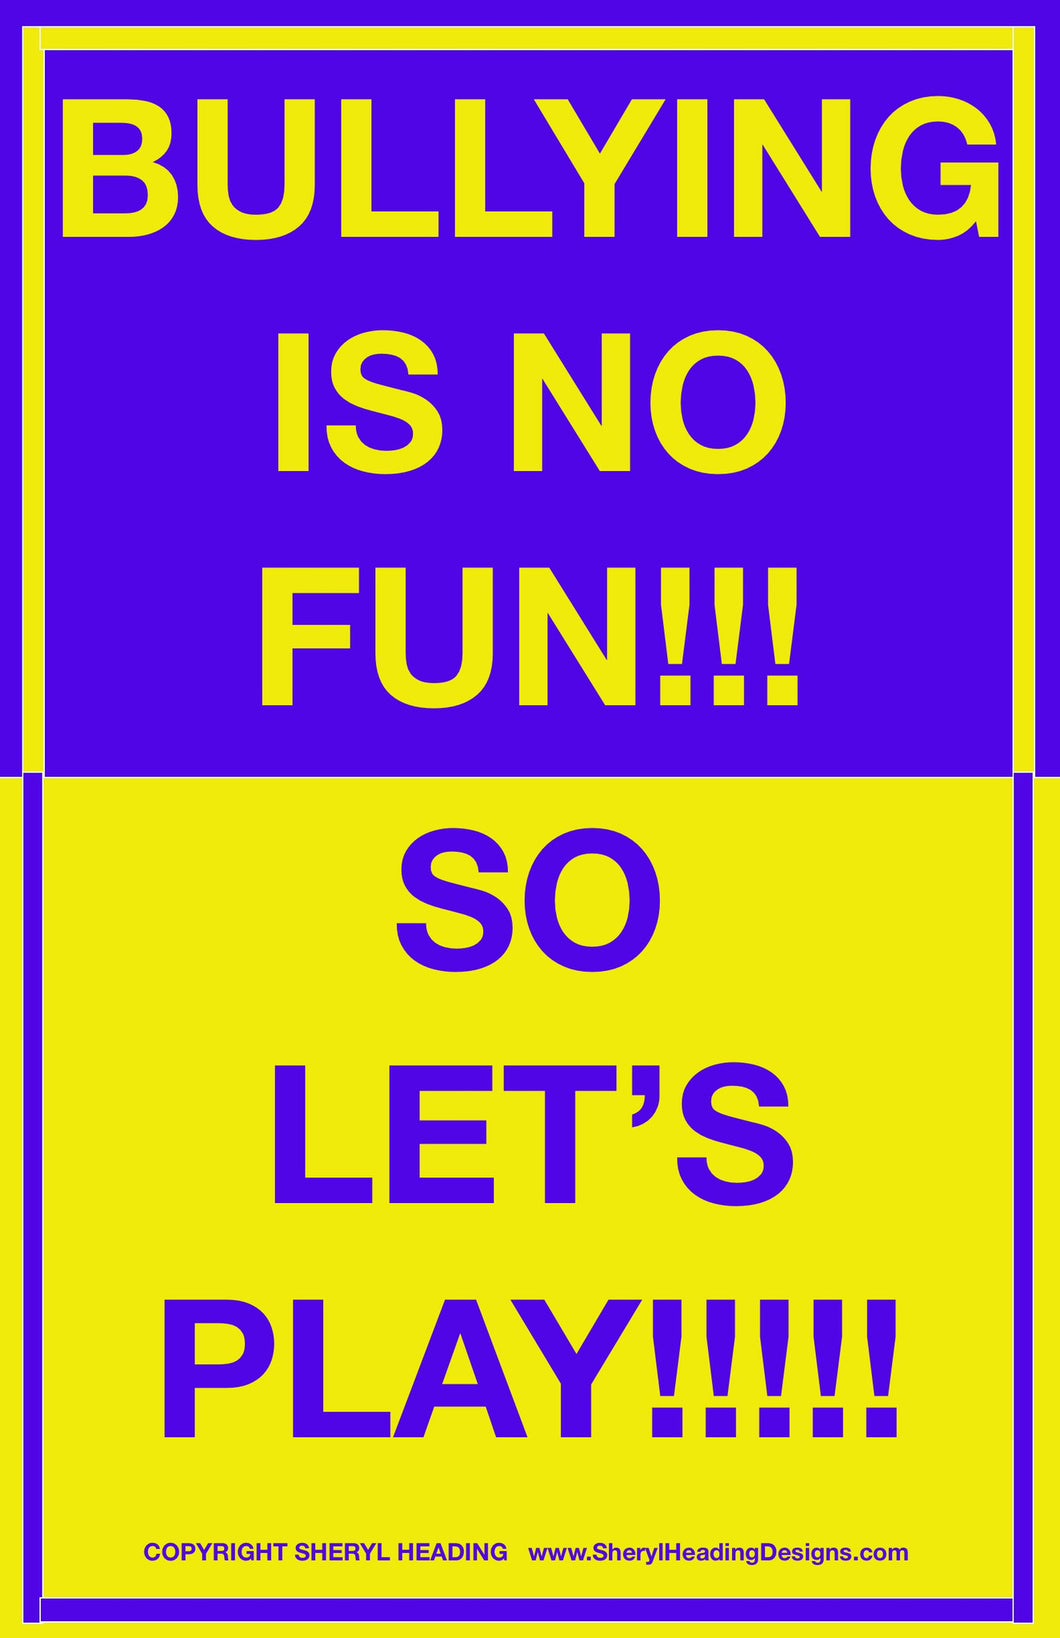 Bullying is No Fun So Let's Play! Poster - Sheryl Heading Designs